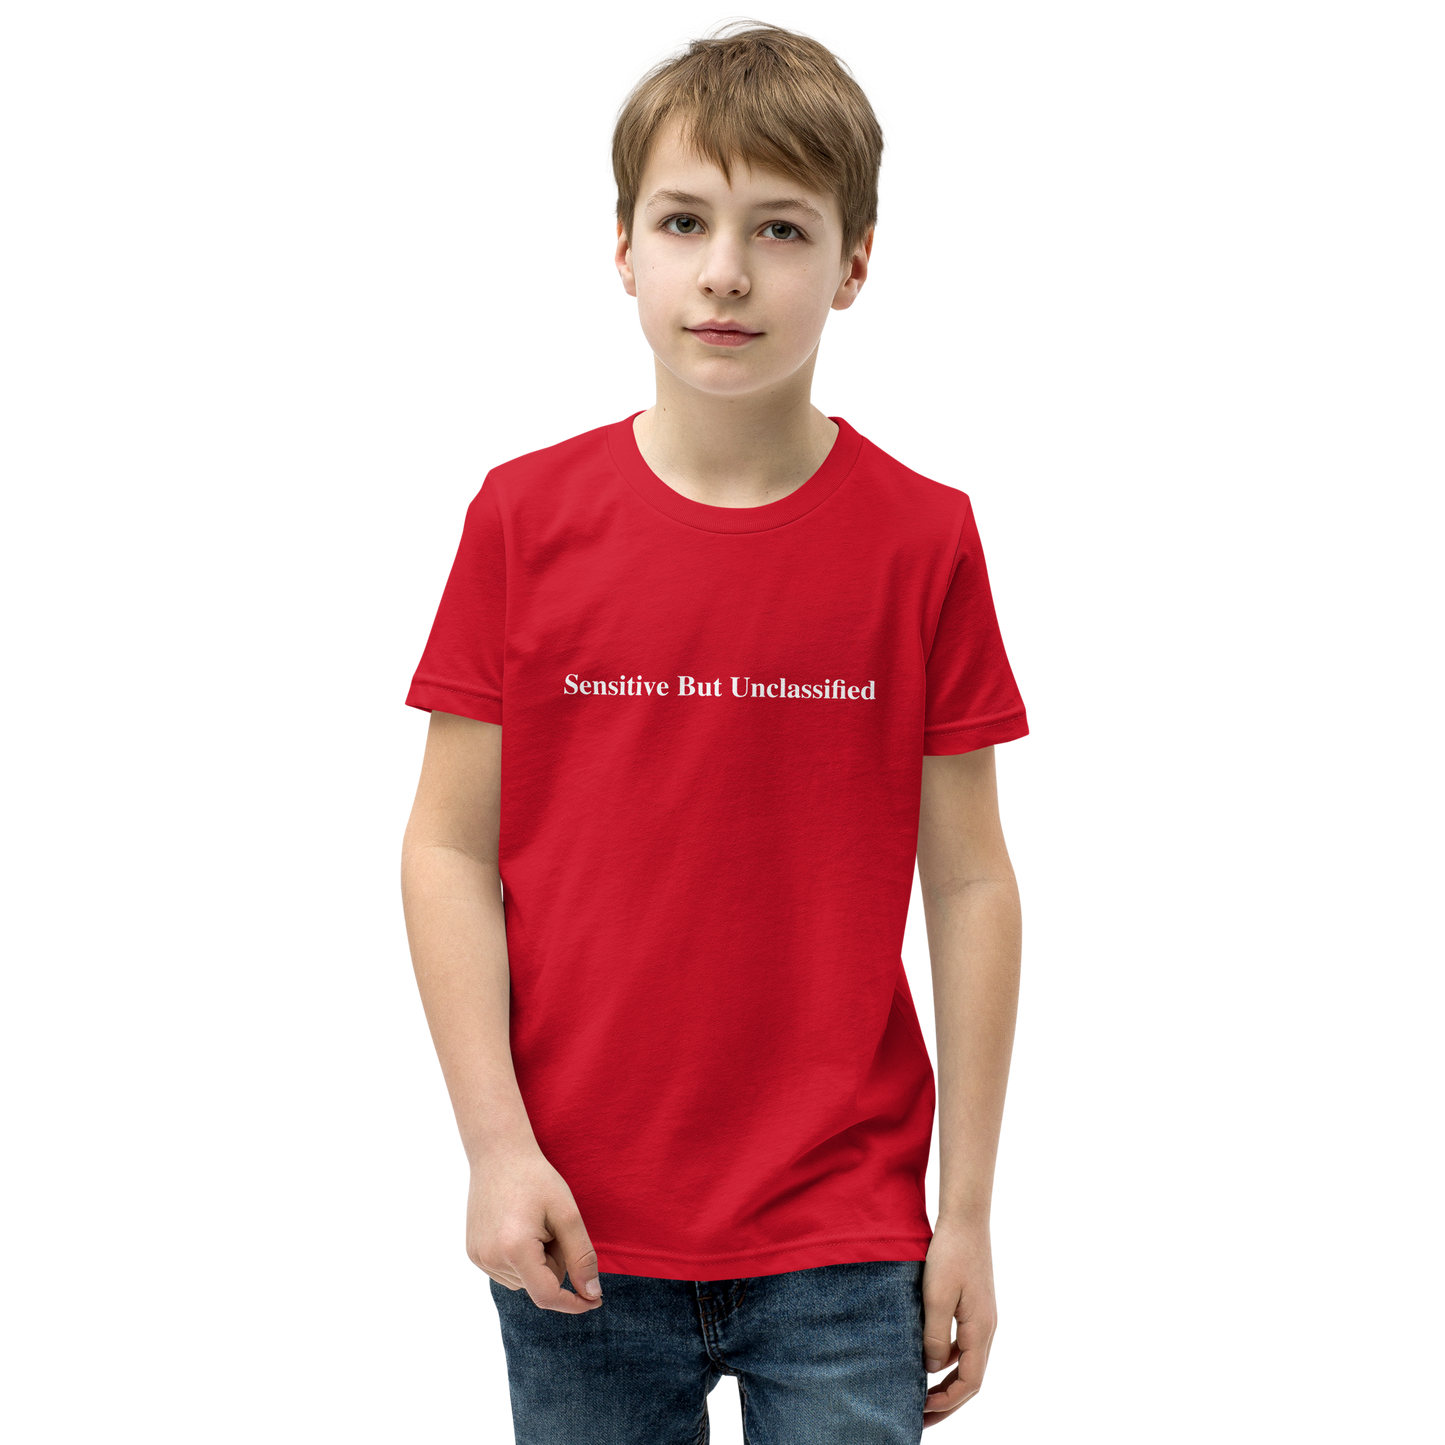 Sensitive But Unclassified youth T-shirt